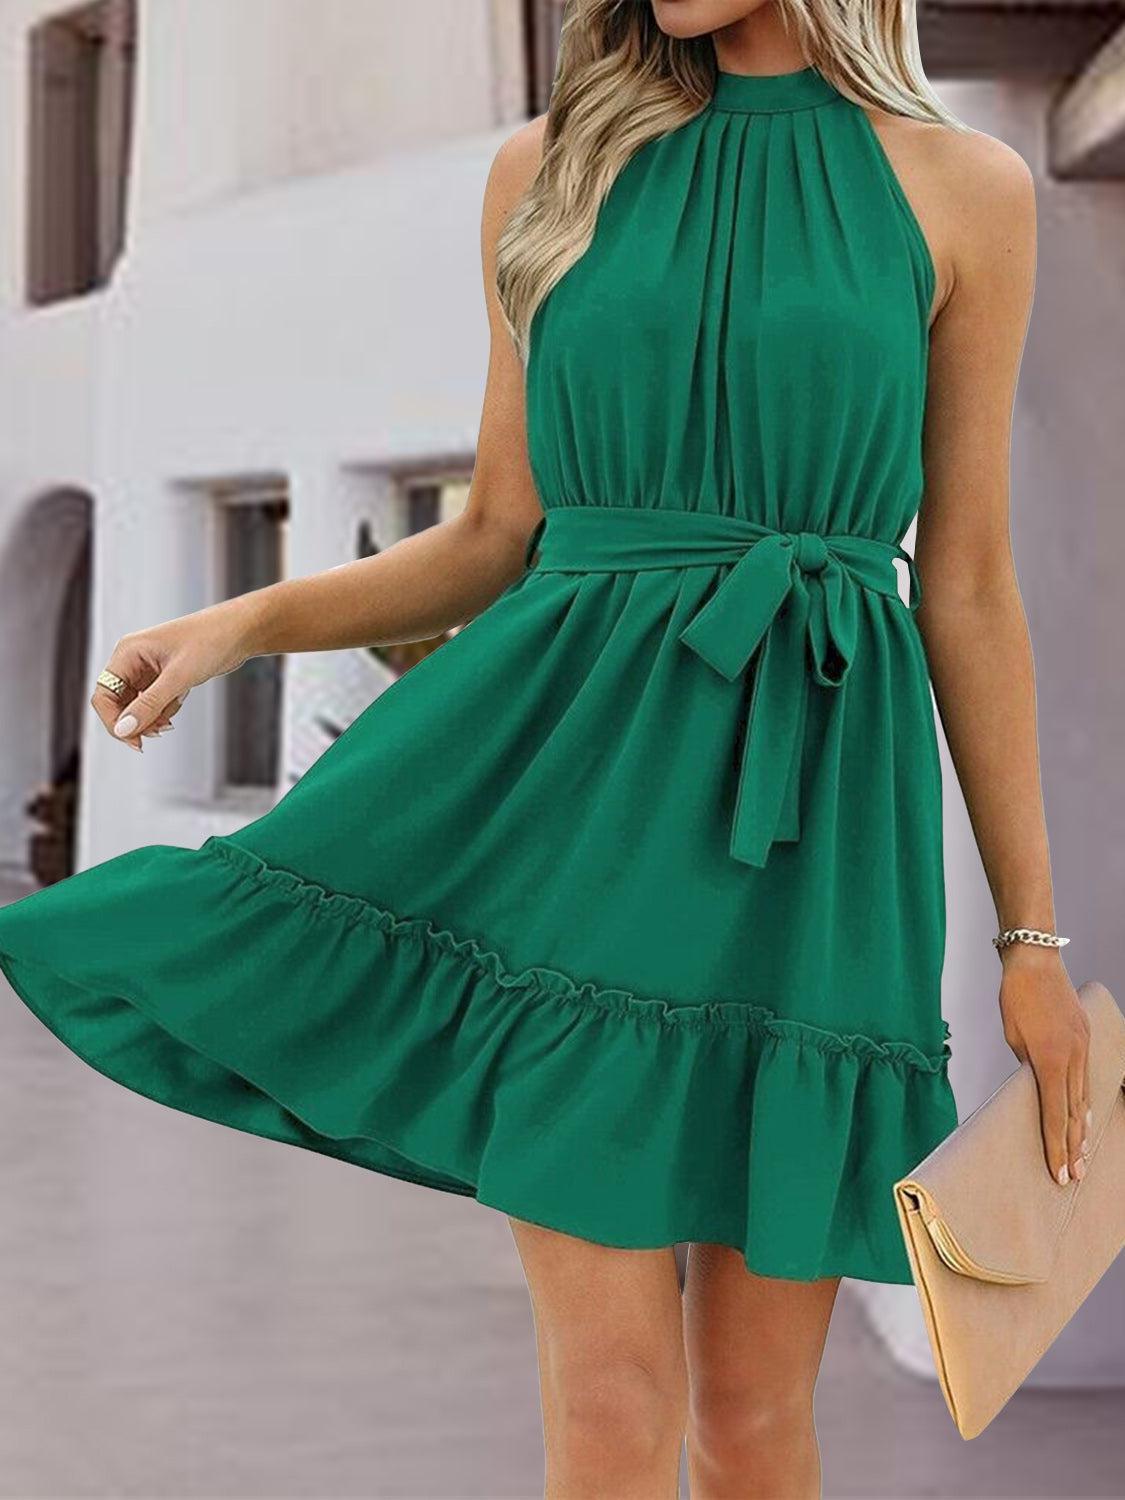 a woman wearing a green dress with a bow at the waist